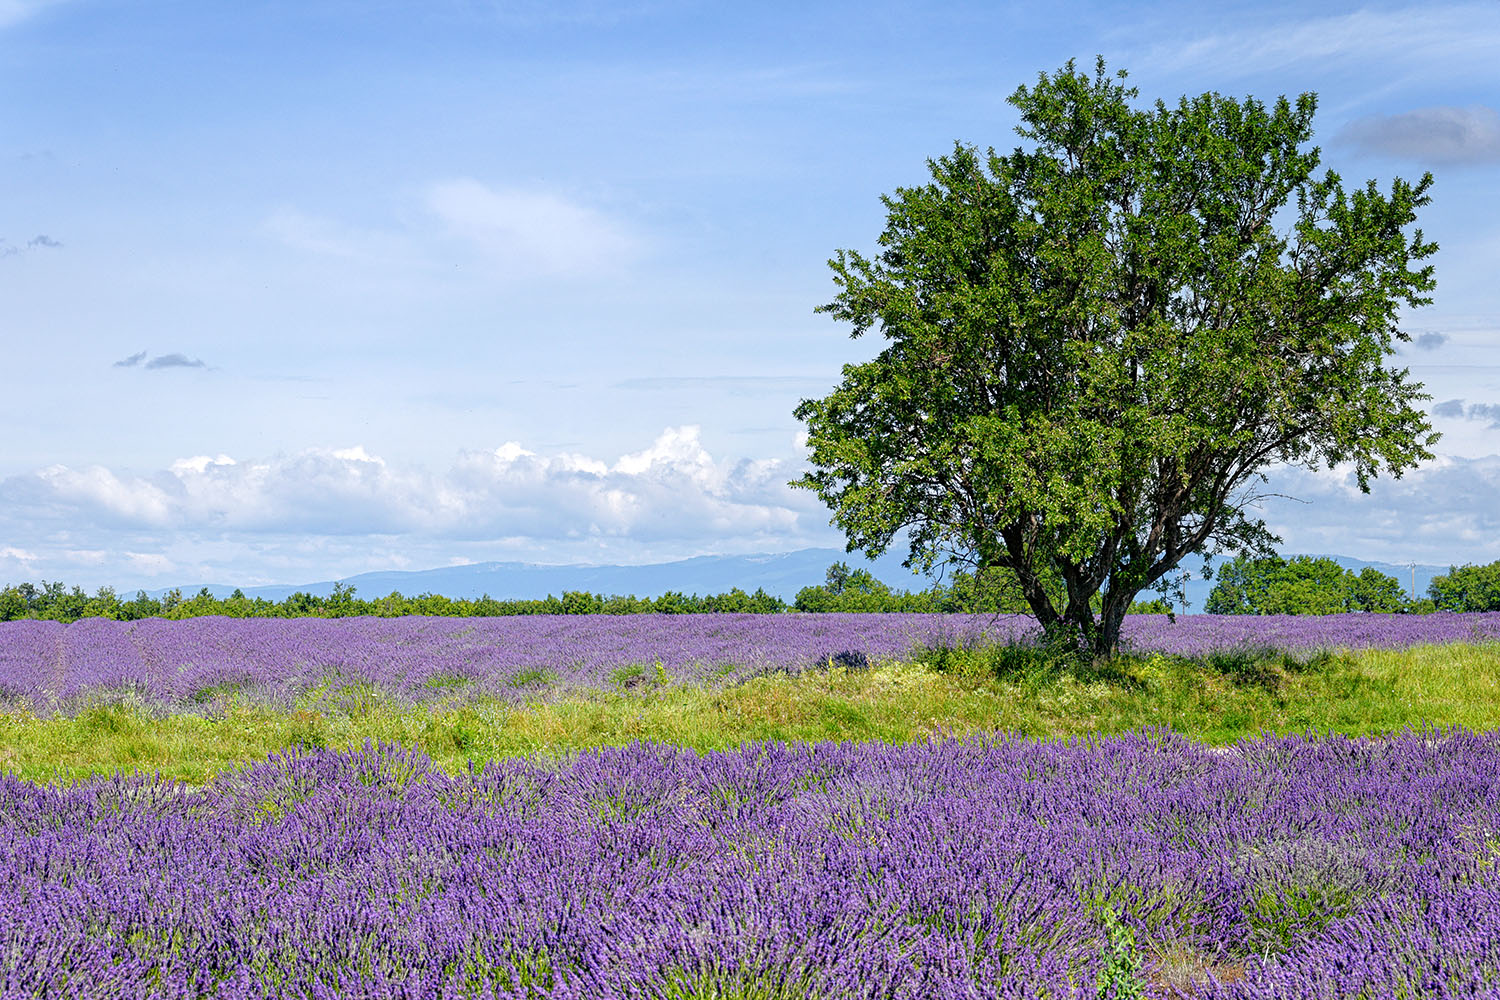 There is something unreal about purple-colored meadows...